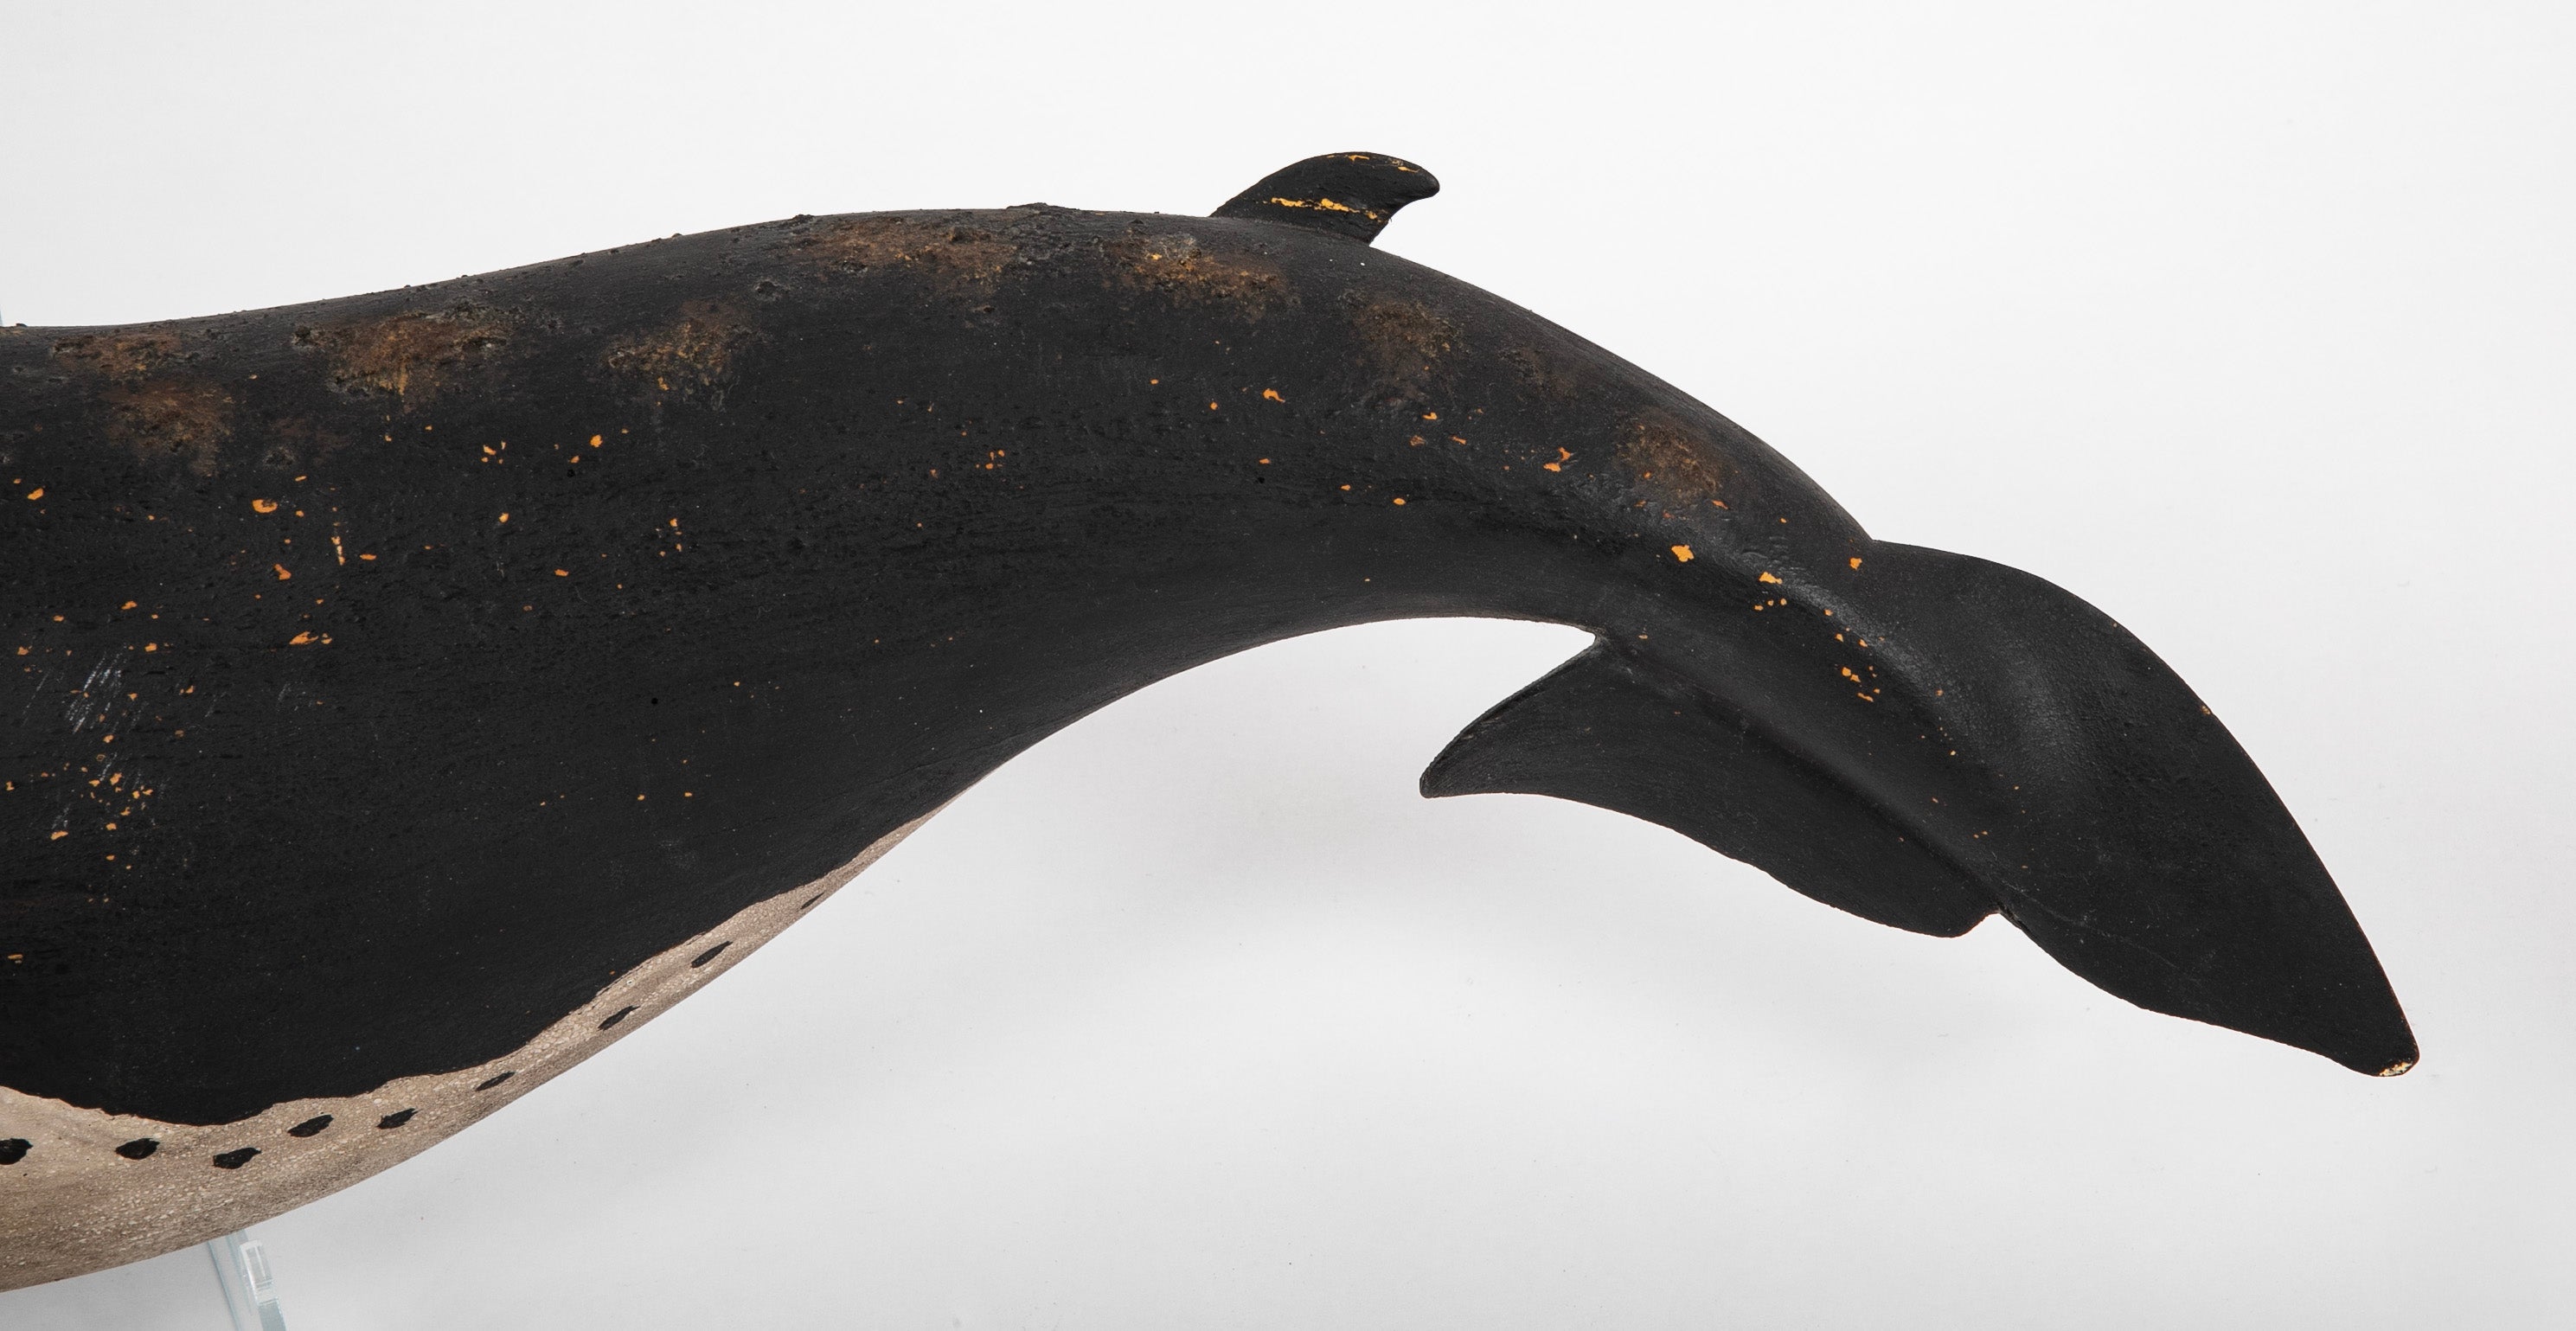 Humpback Whale Carved in Wood by Roger Mitchell